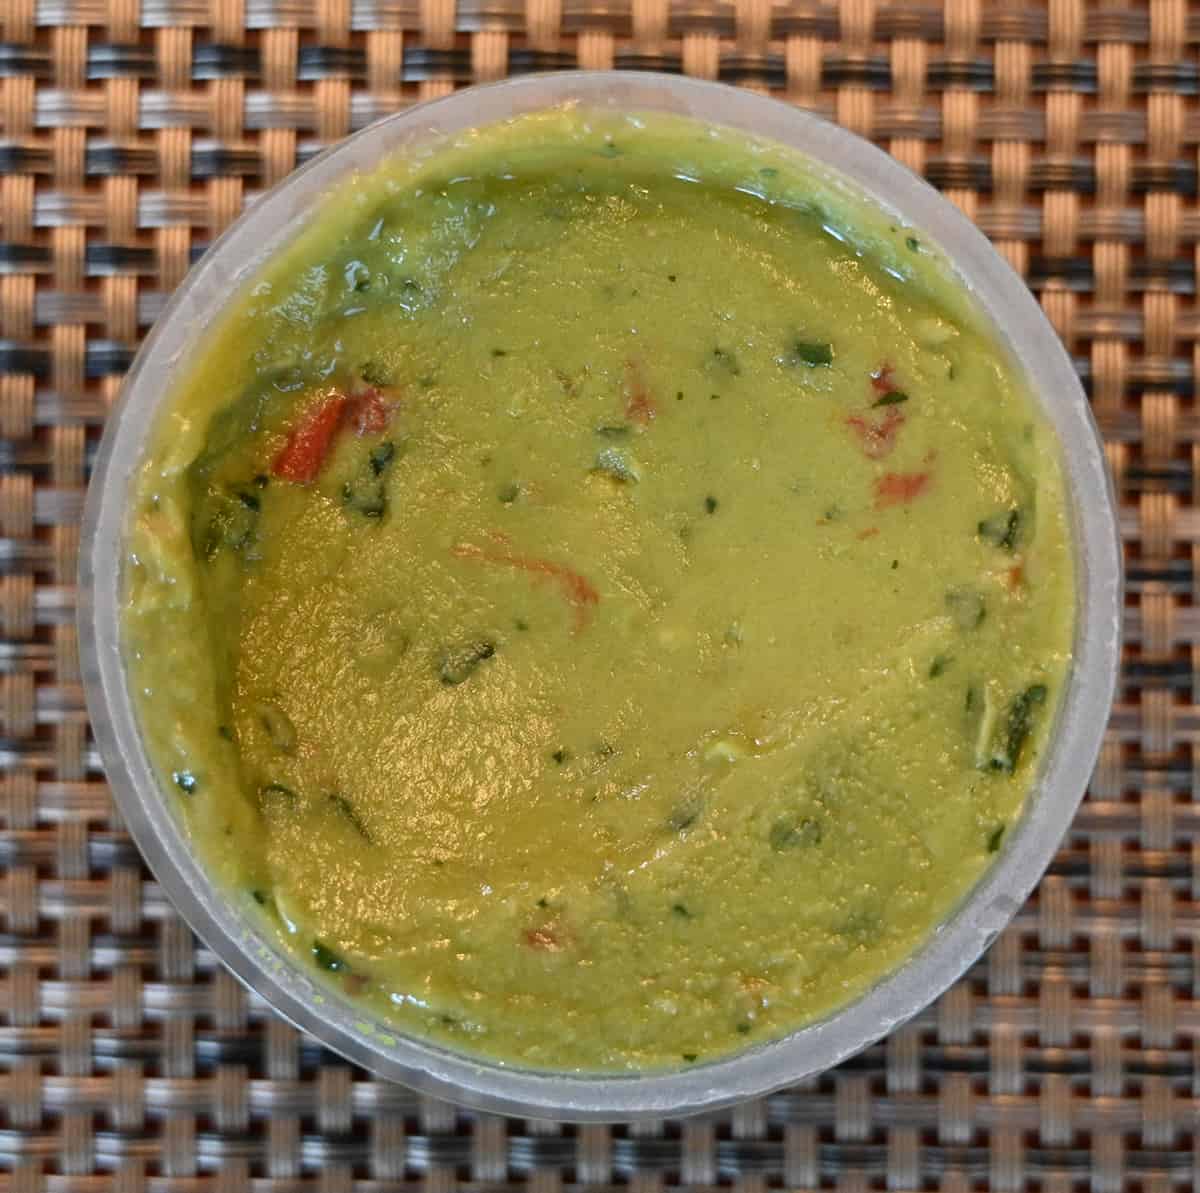 Top down closeup image of one open guacamole cup showing what the guacamole looks like.